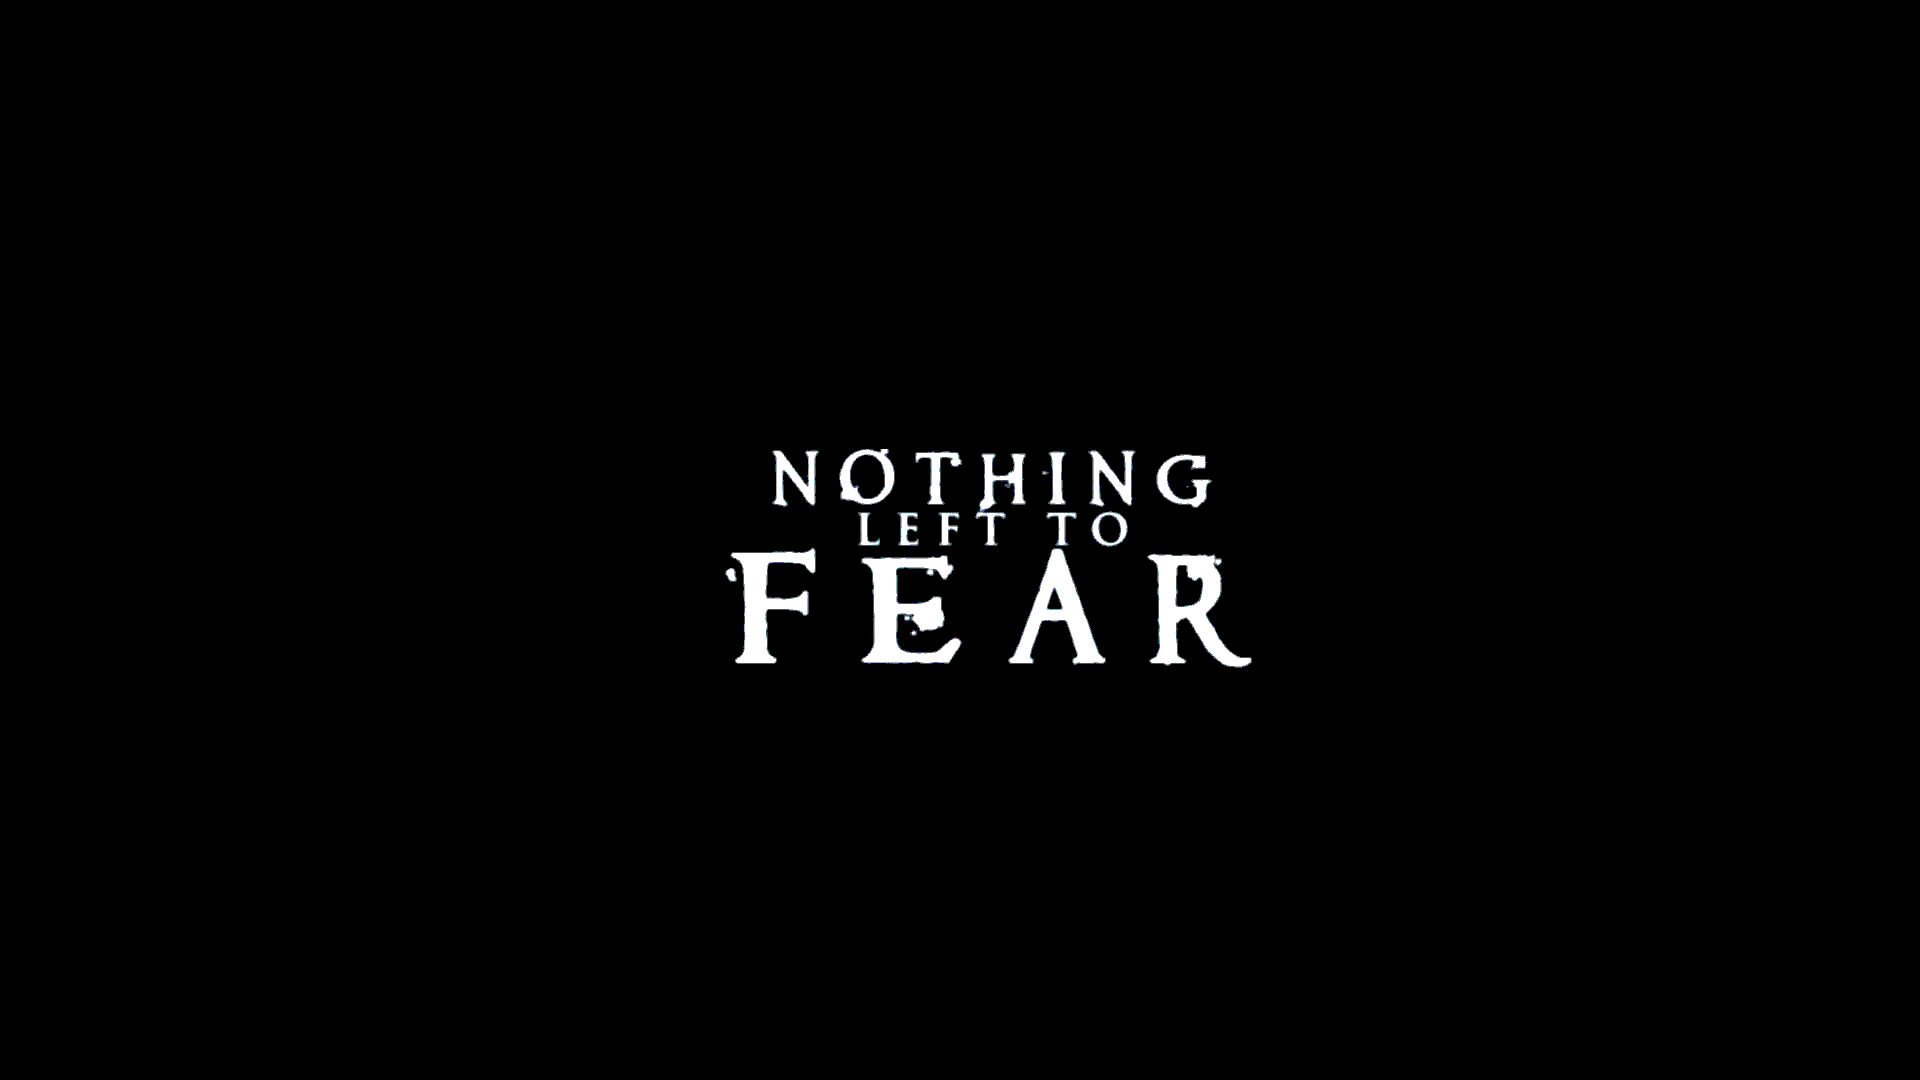 NOTHING LEFT TO FEAR dark horror supernatural nothing left fear